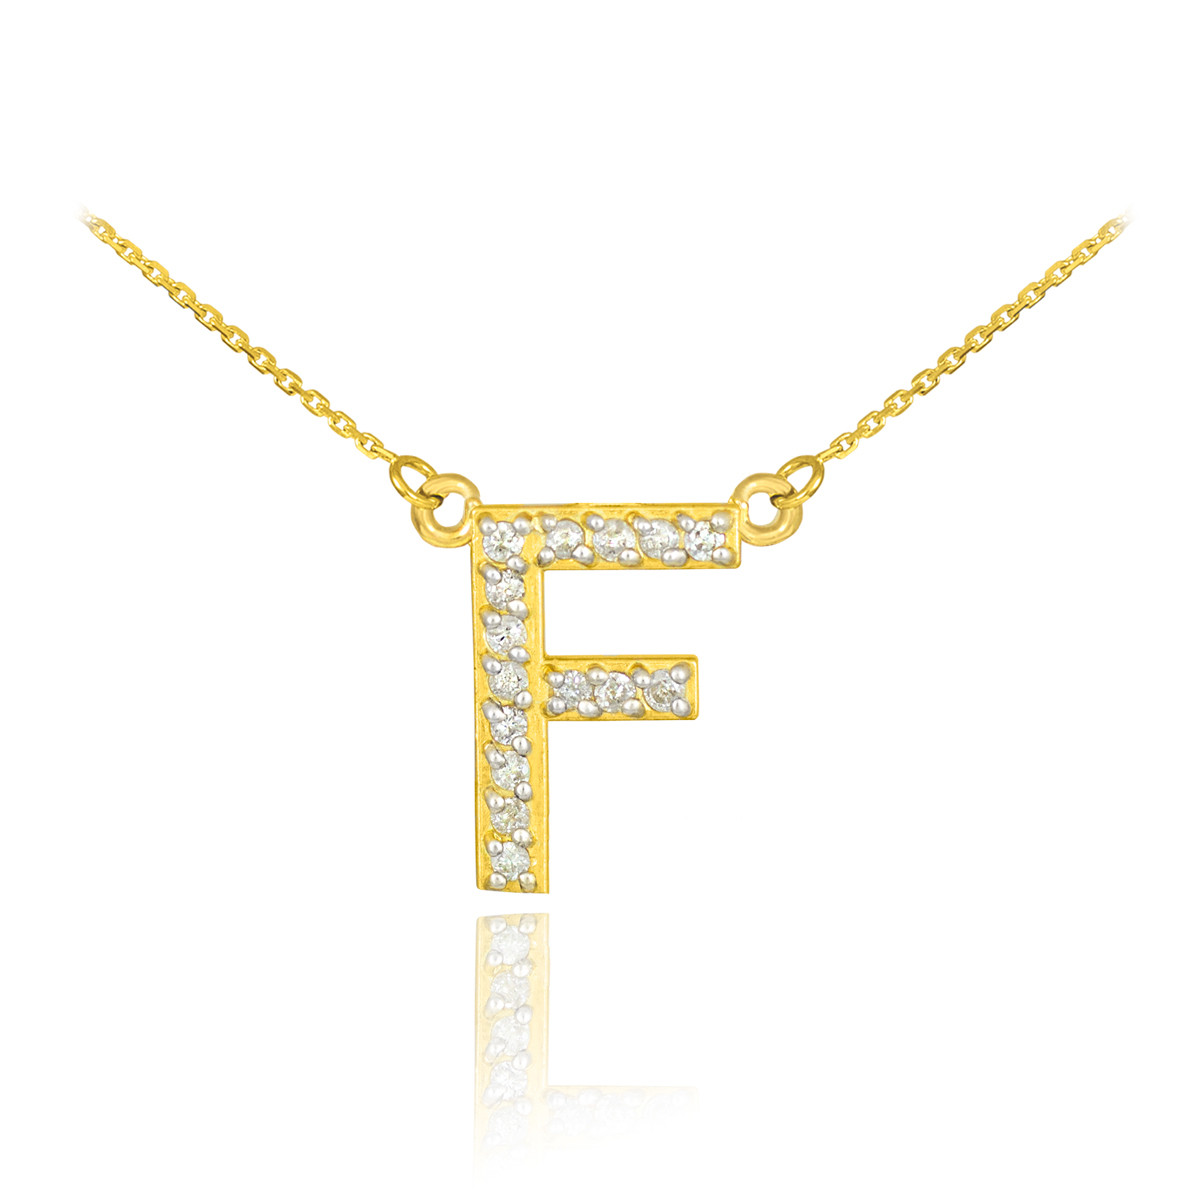 14kt Yellow Gold Initial Monogram Name Letter F Pendant Charm